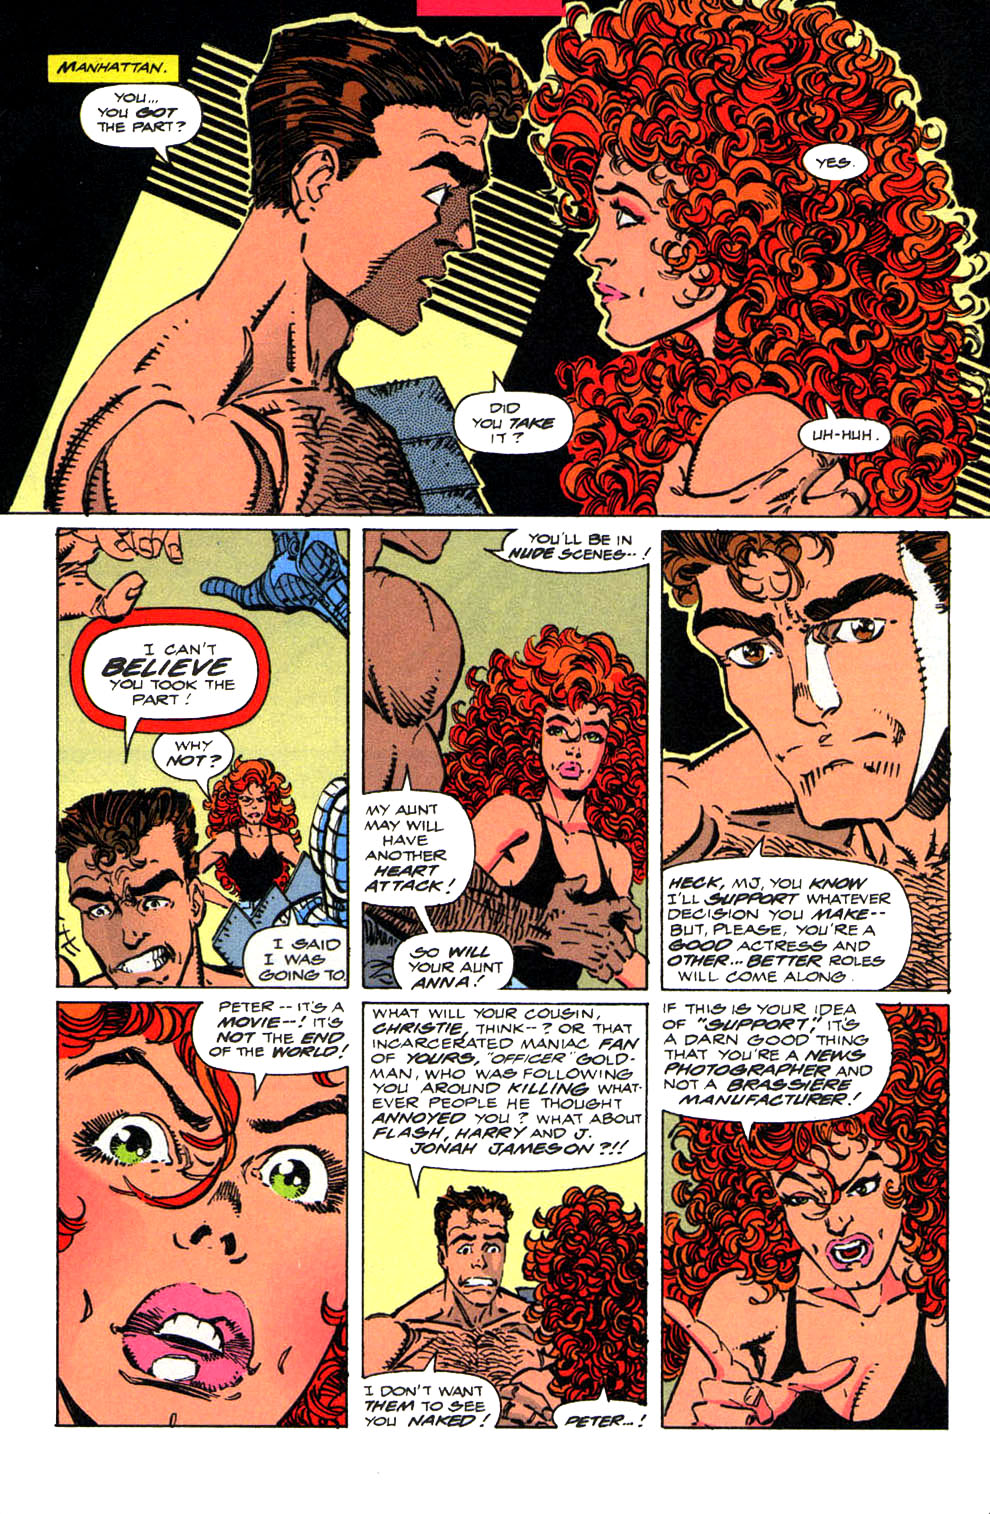 Spider-Man (1990) 22_-_The_Sixth_Member Page 9